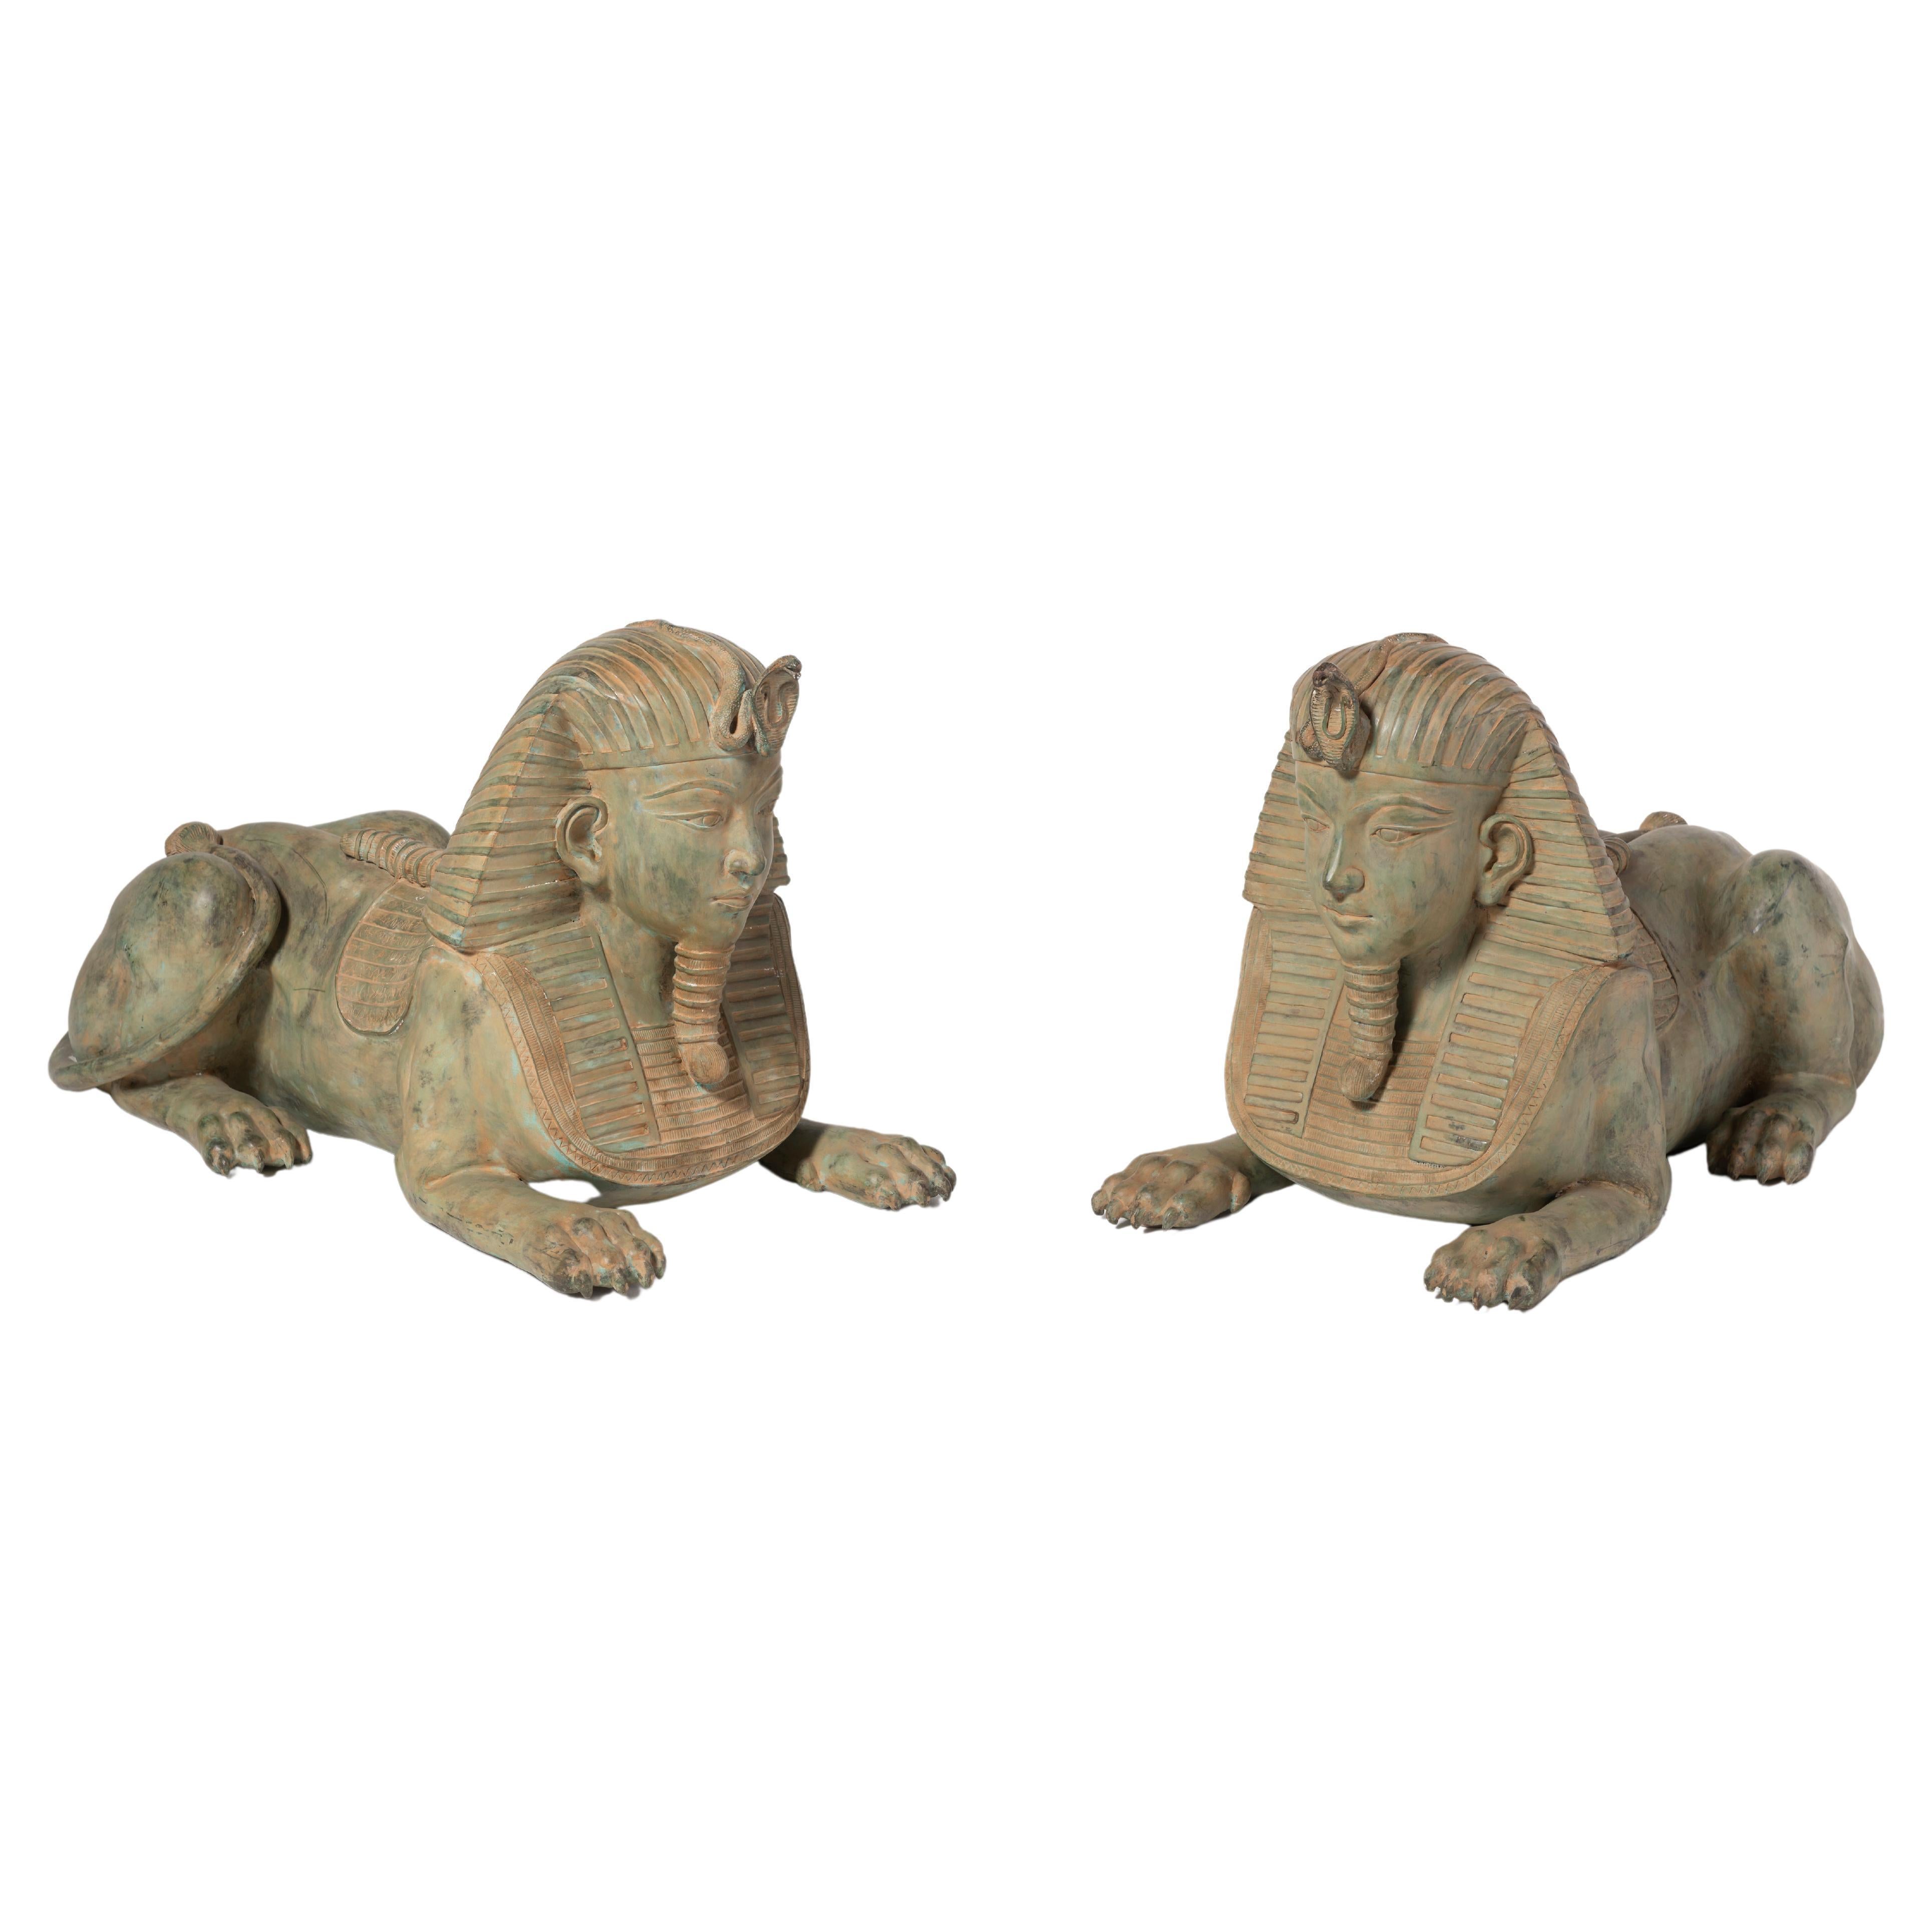  Pair of Grand Tour Style Large Patinated Figures of Seated Sphinxes